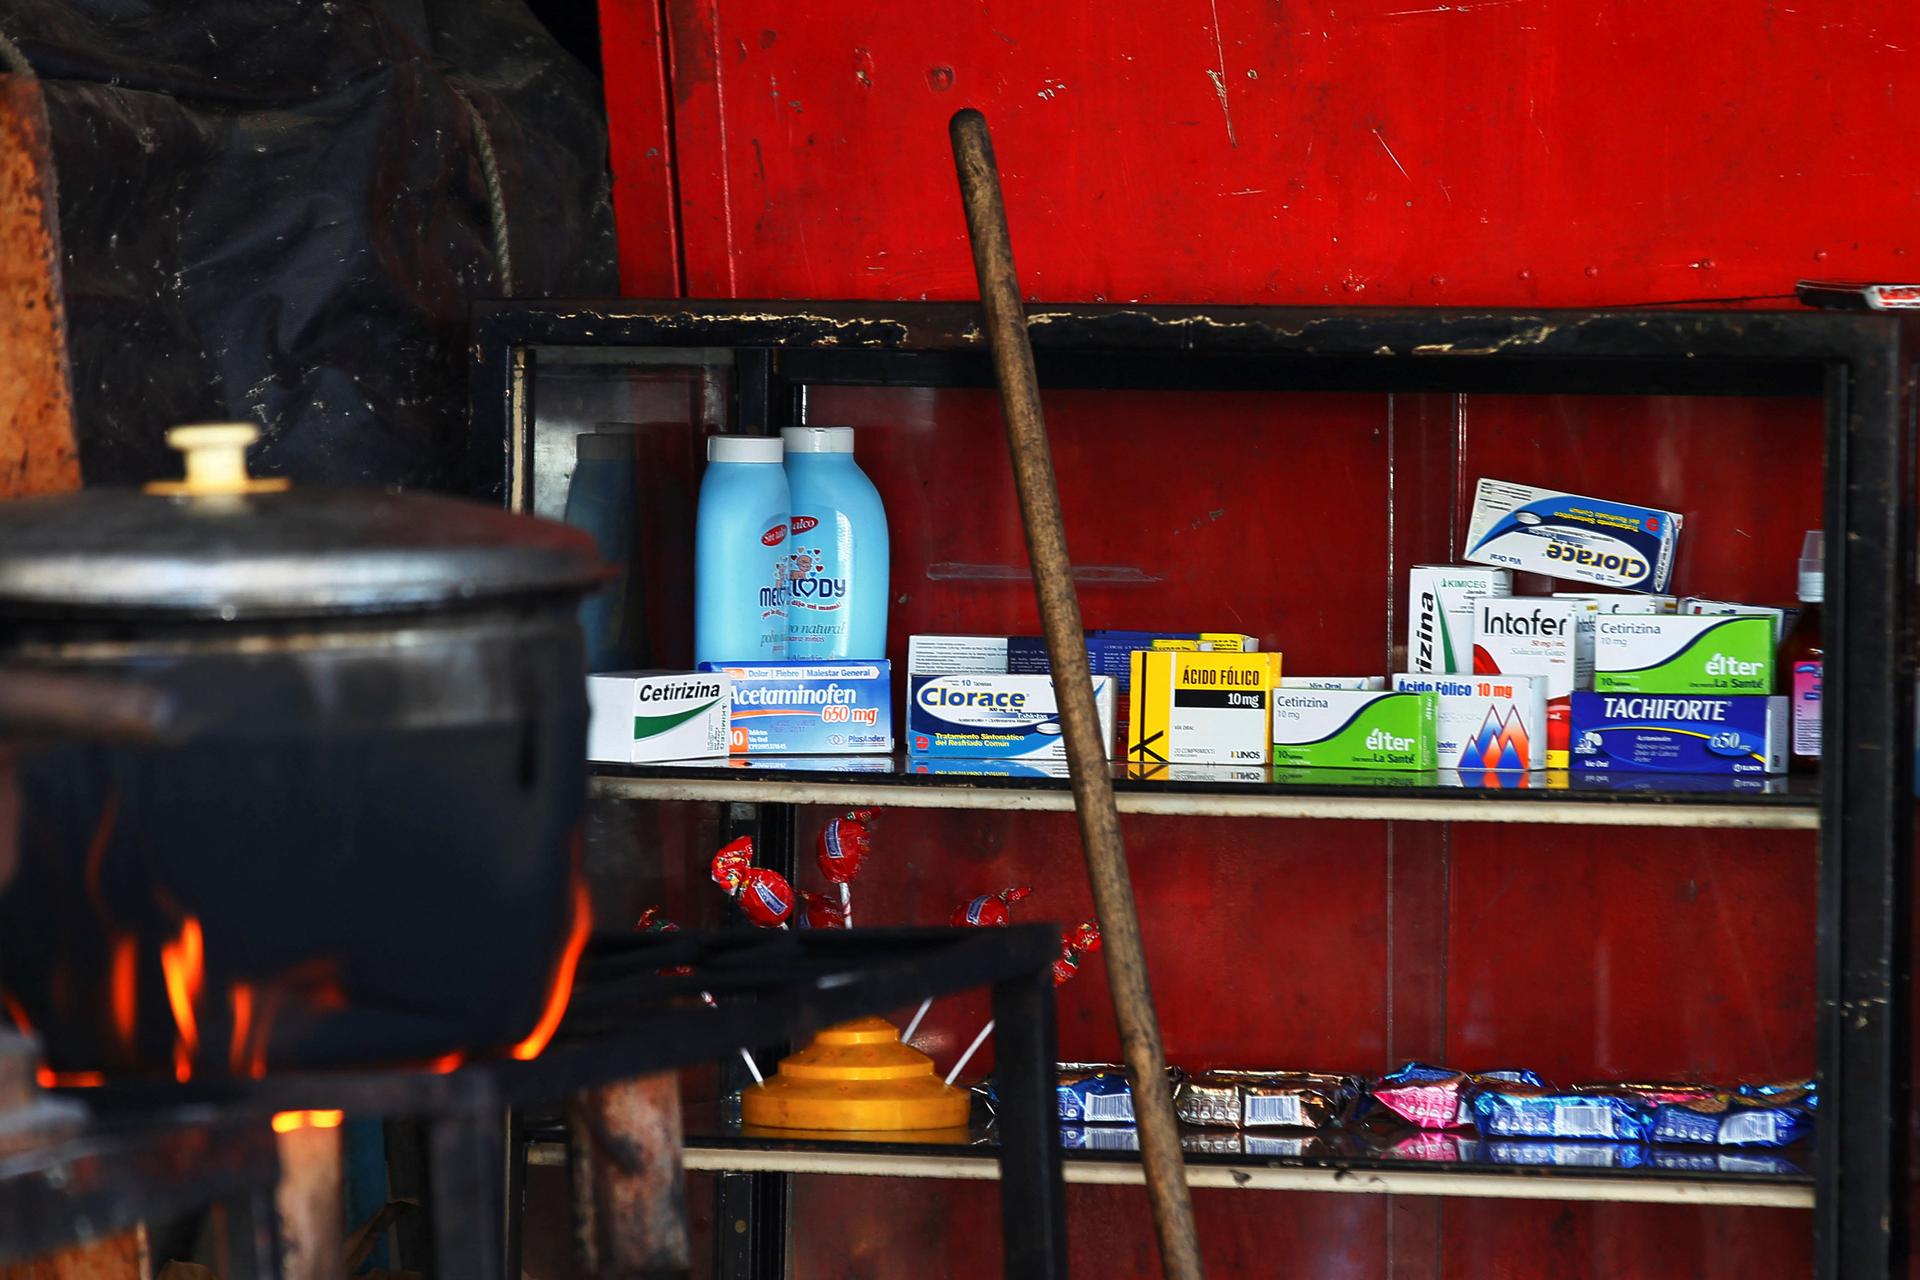 Medicines are displayed on sale in a stall at Las Pulgas market in Maracaibo, Venezuela.